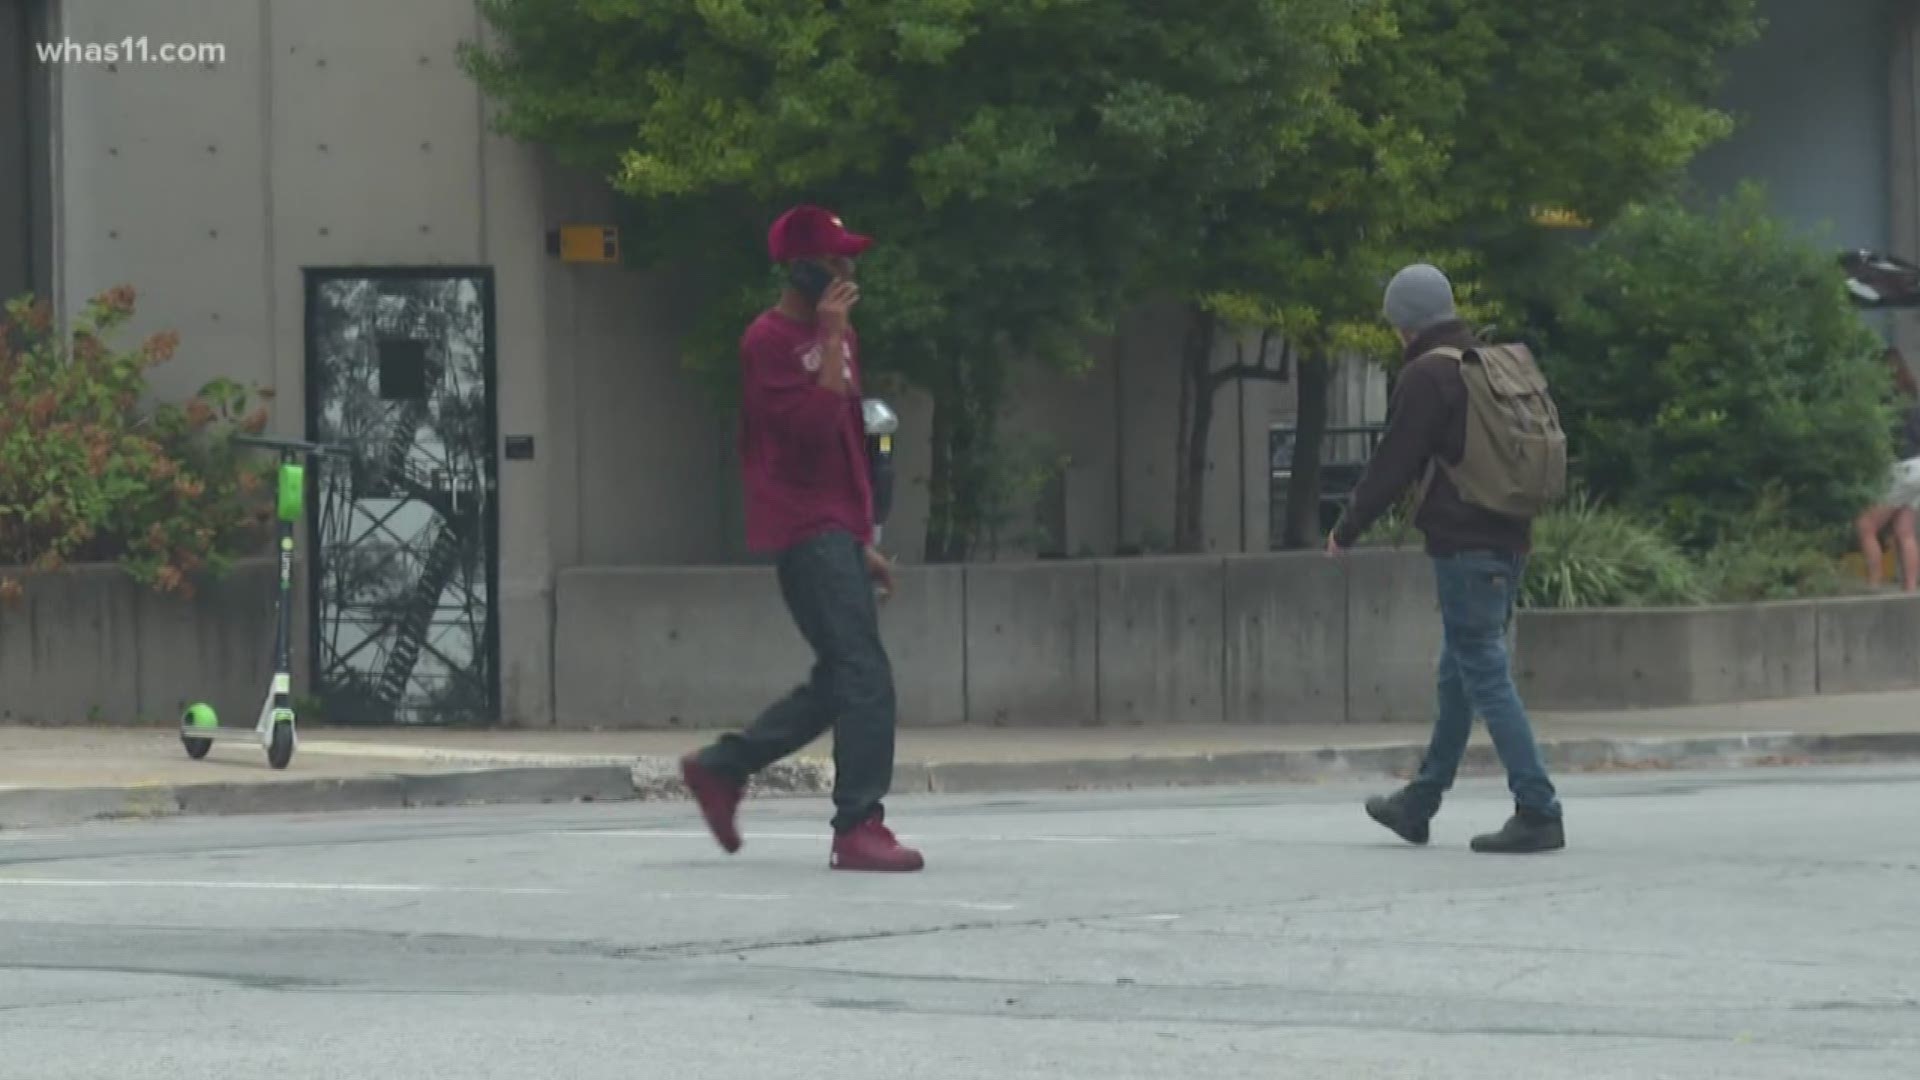 Officers will fine jaywalkers and panhandlers who approach vehicles in the middle of the road.